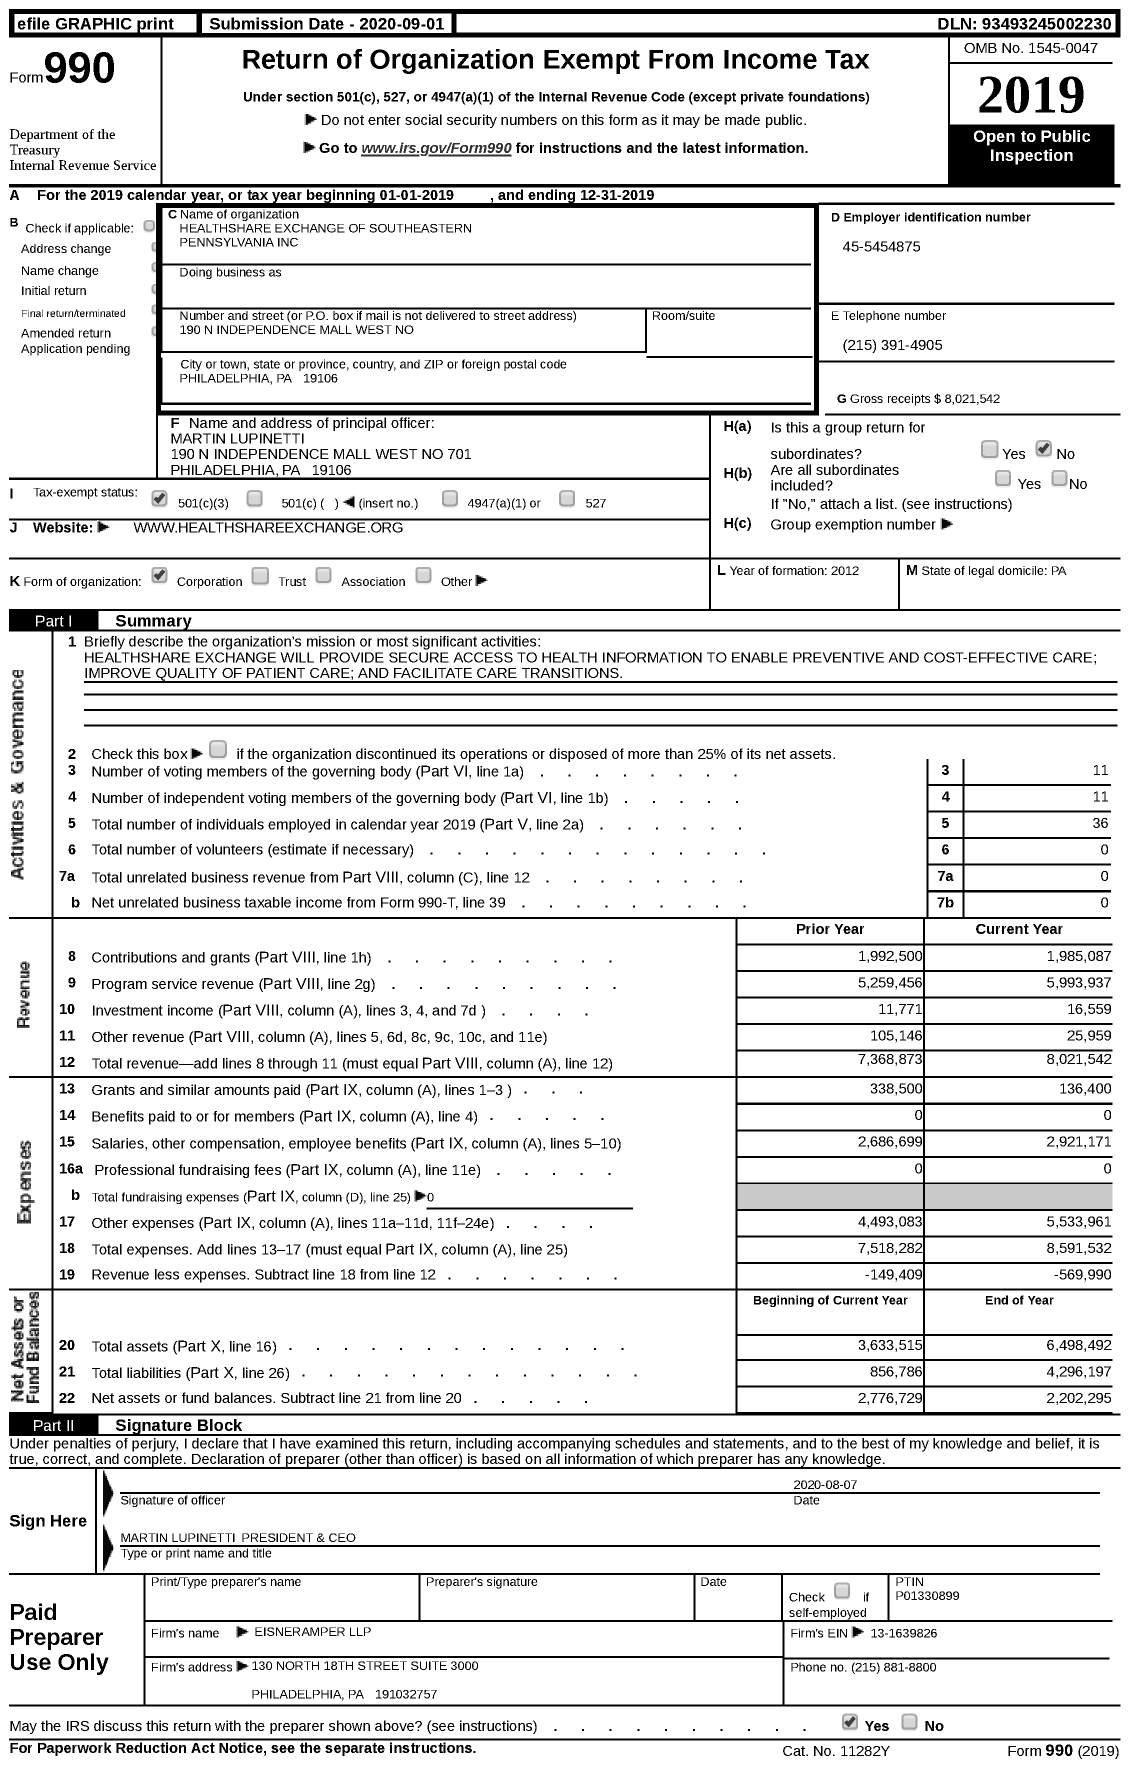 Image of first page of 2019 Form 990 for Healthshare Exchange of Southeastern Pennsylvania (HSX)